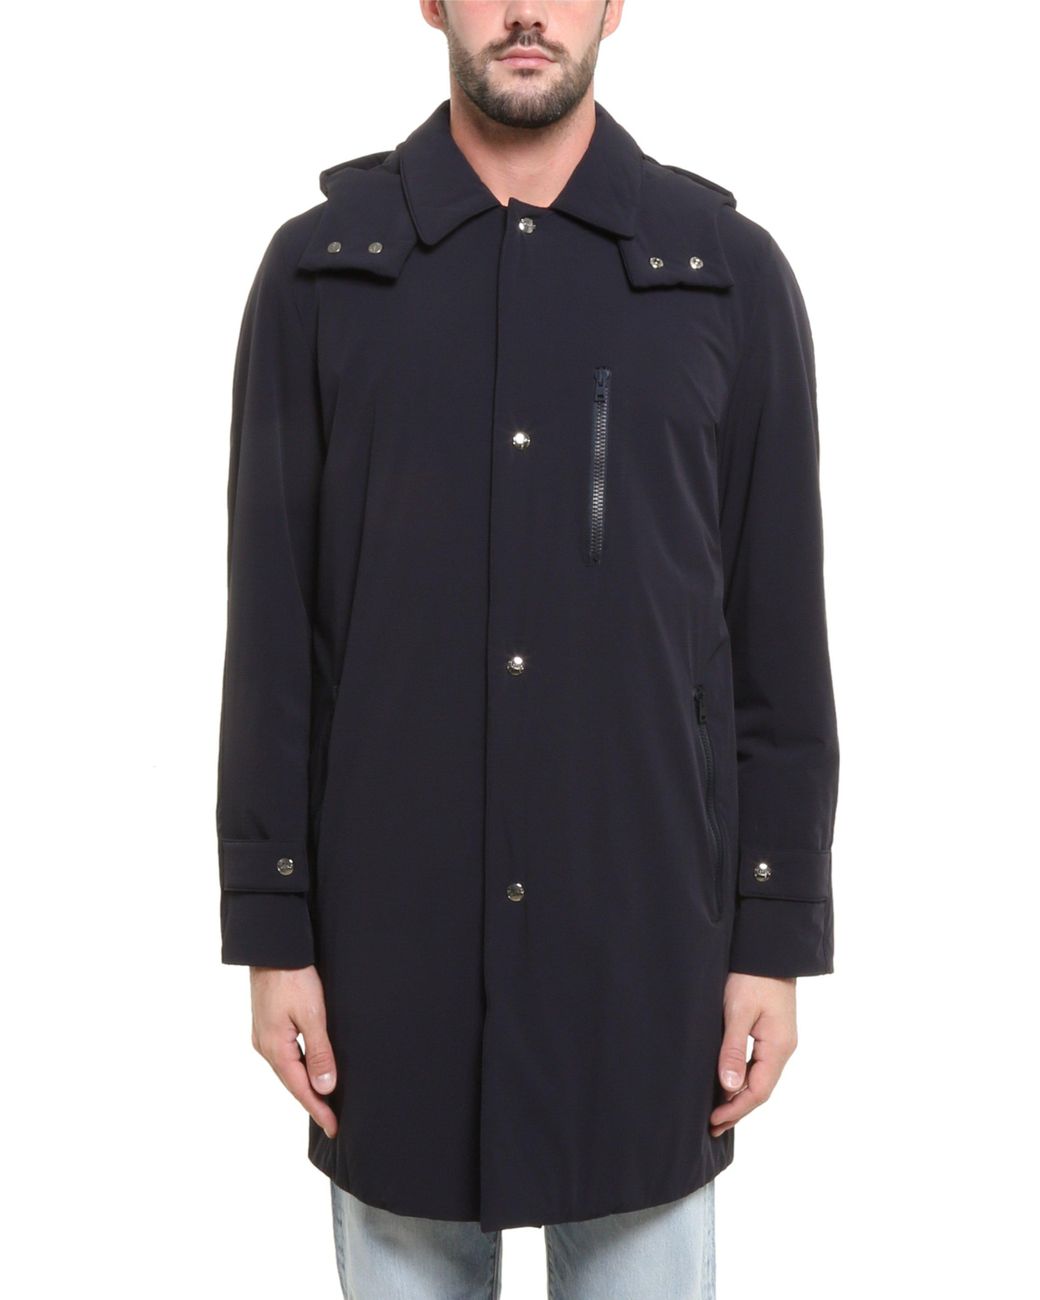 Herno Synthetic Hooded Parka Coat in Blue for Men - Lyst